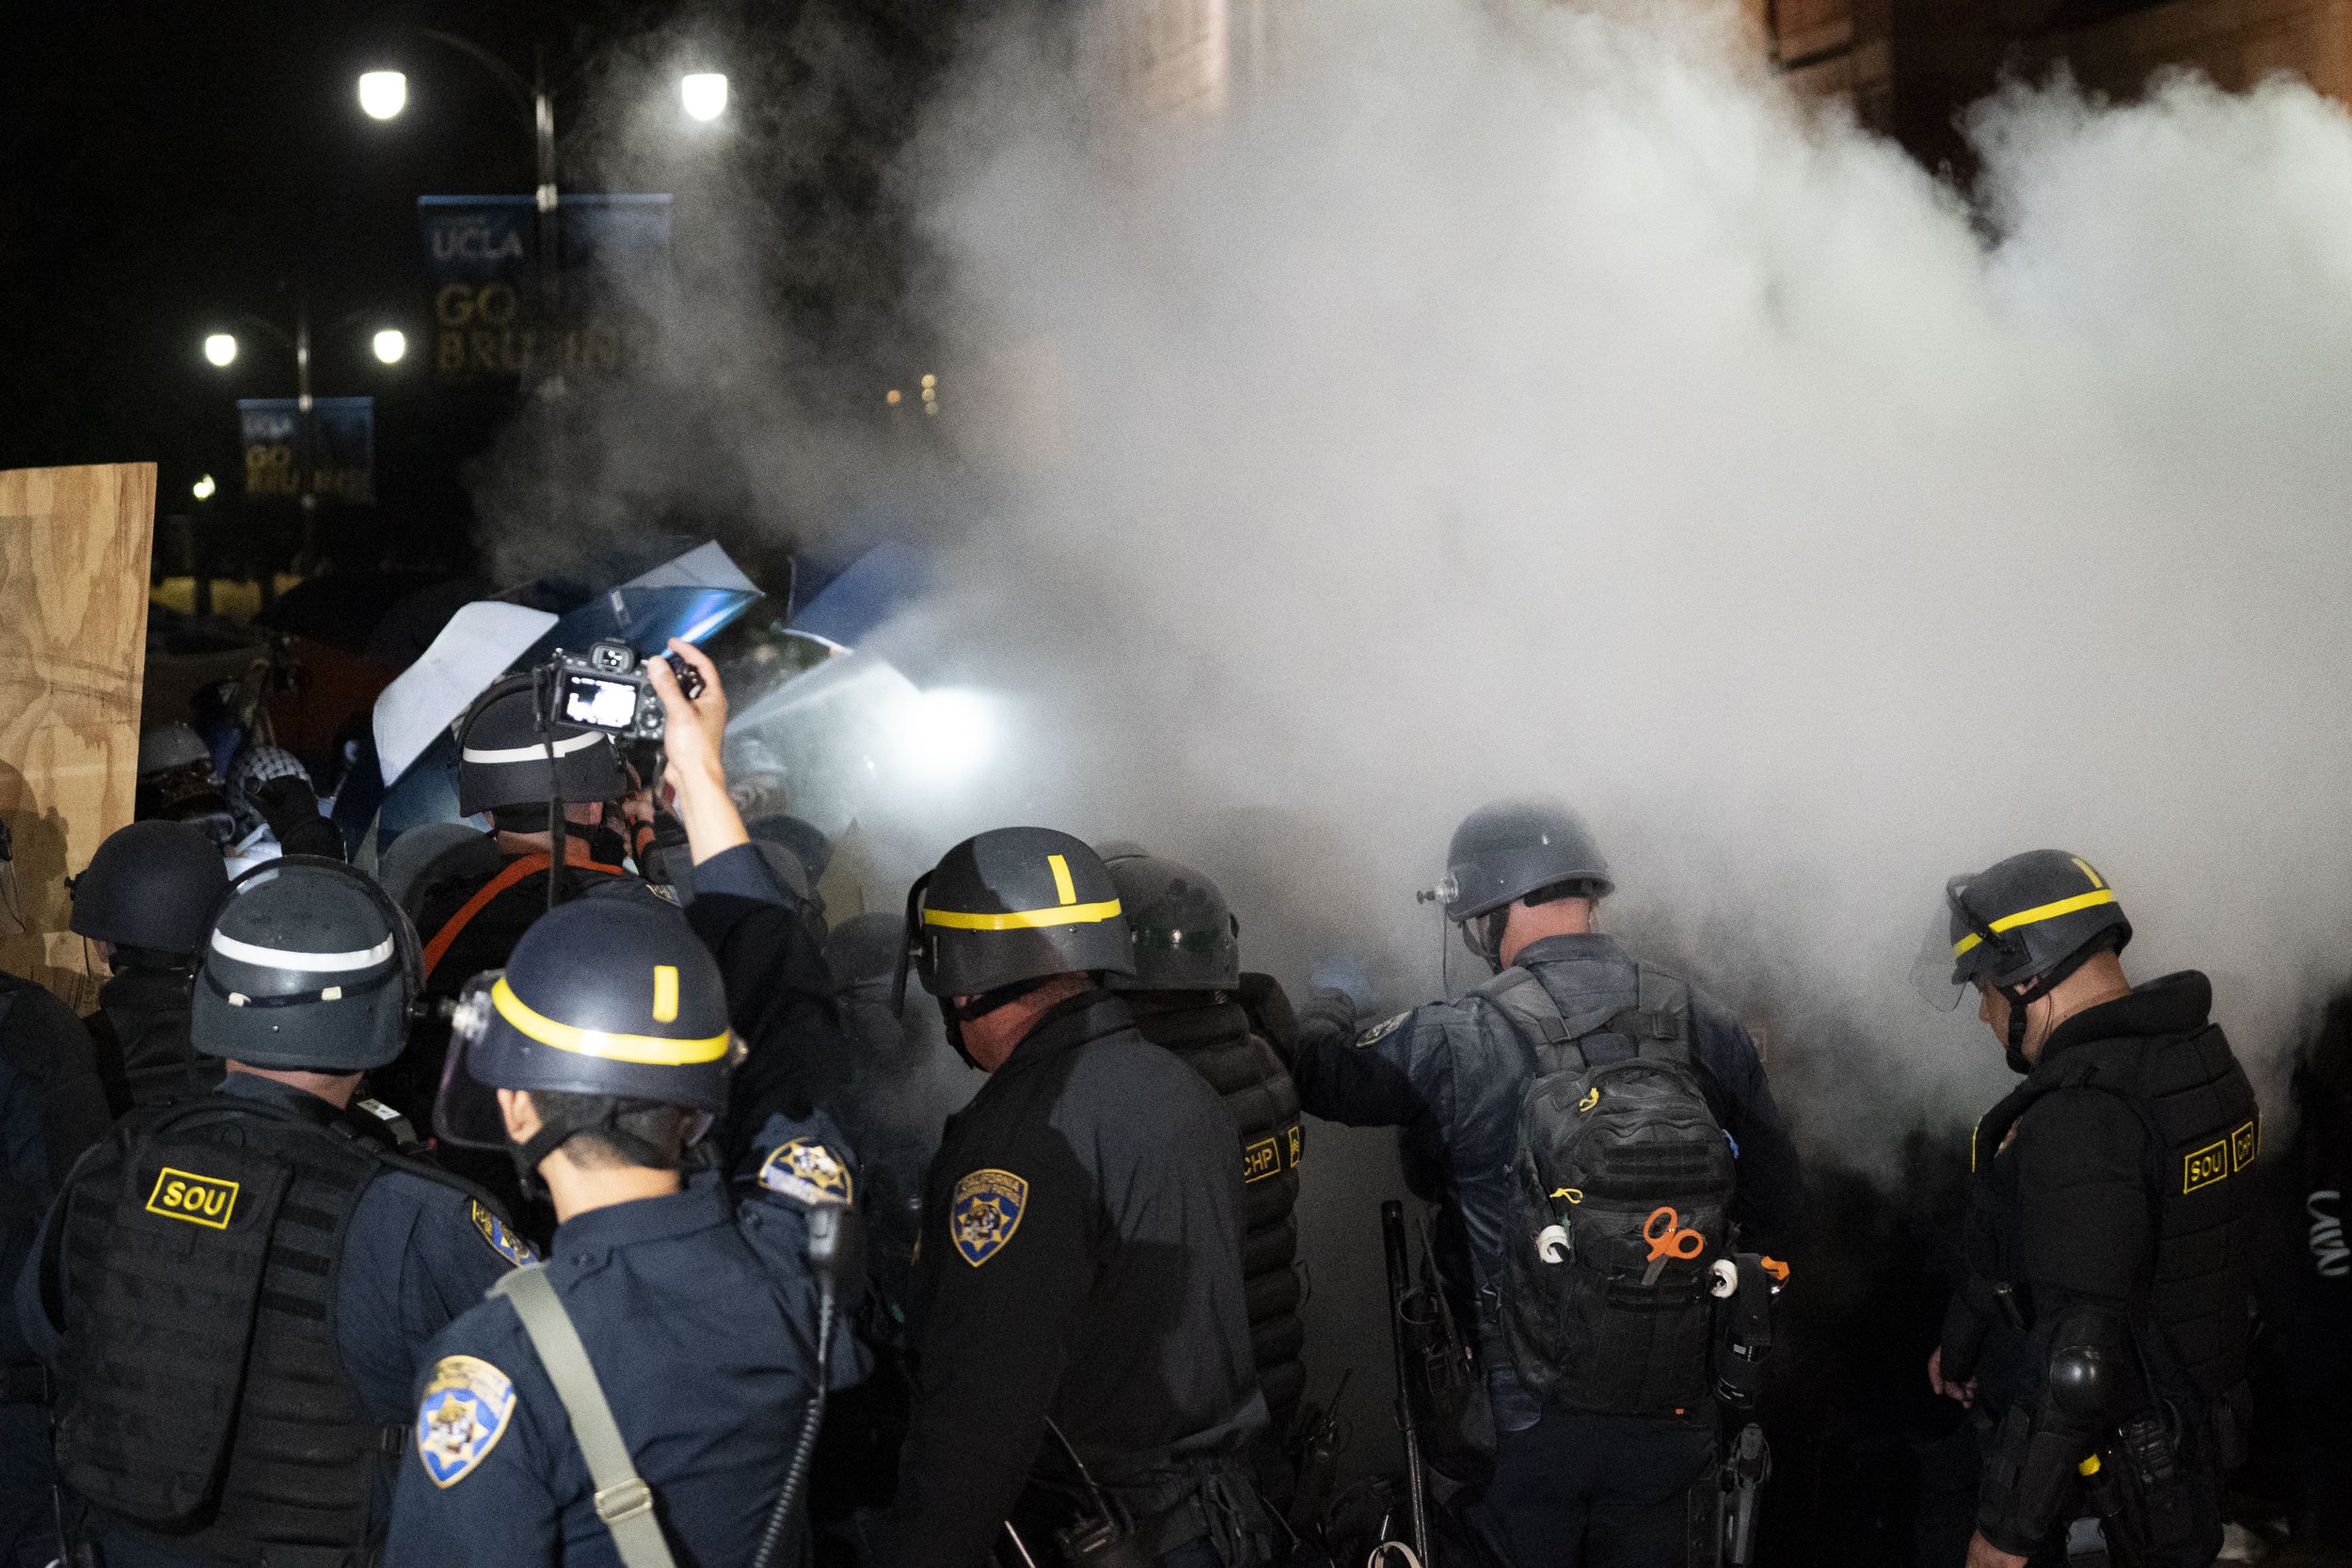  California Highway Patrol Special Operations Unit gets sprayed with dry chemicals from a fire extinguisher by pro-Palastinian protesters within the encampment on Dickson Court of the University of California, Los Angeles on Wednesday, May 1 at Los A